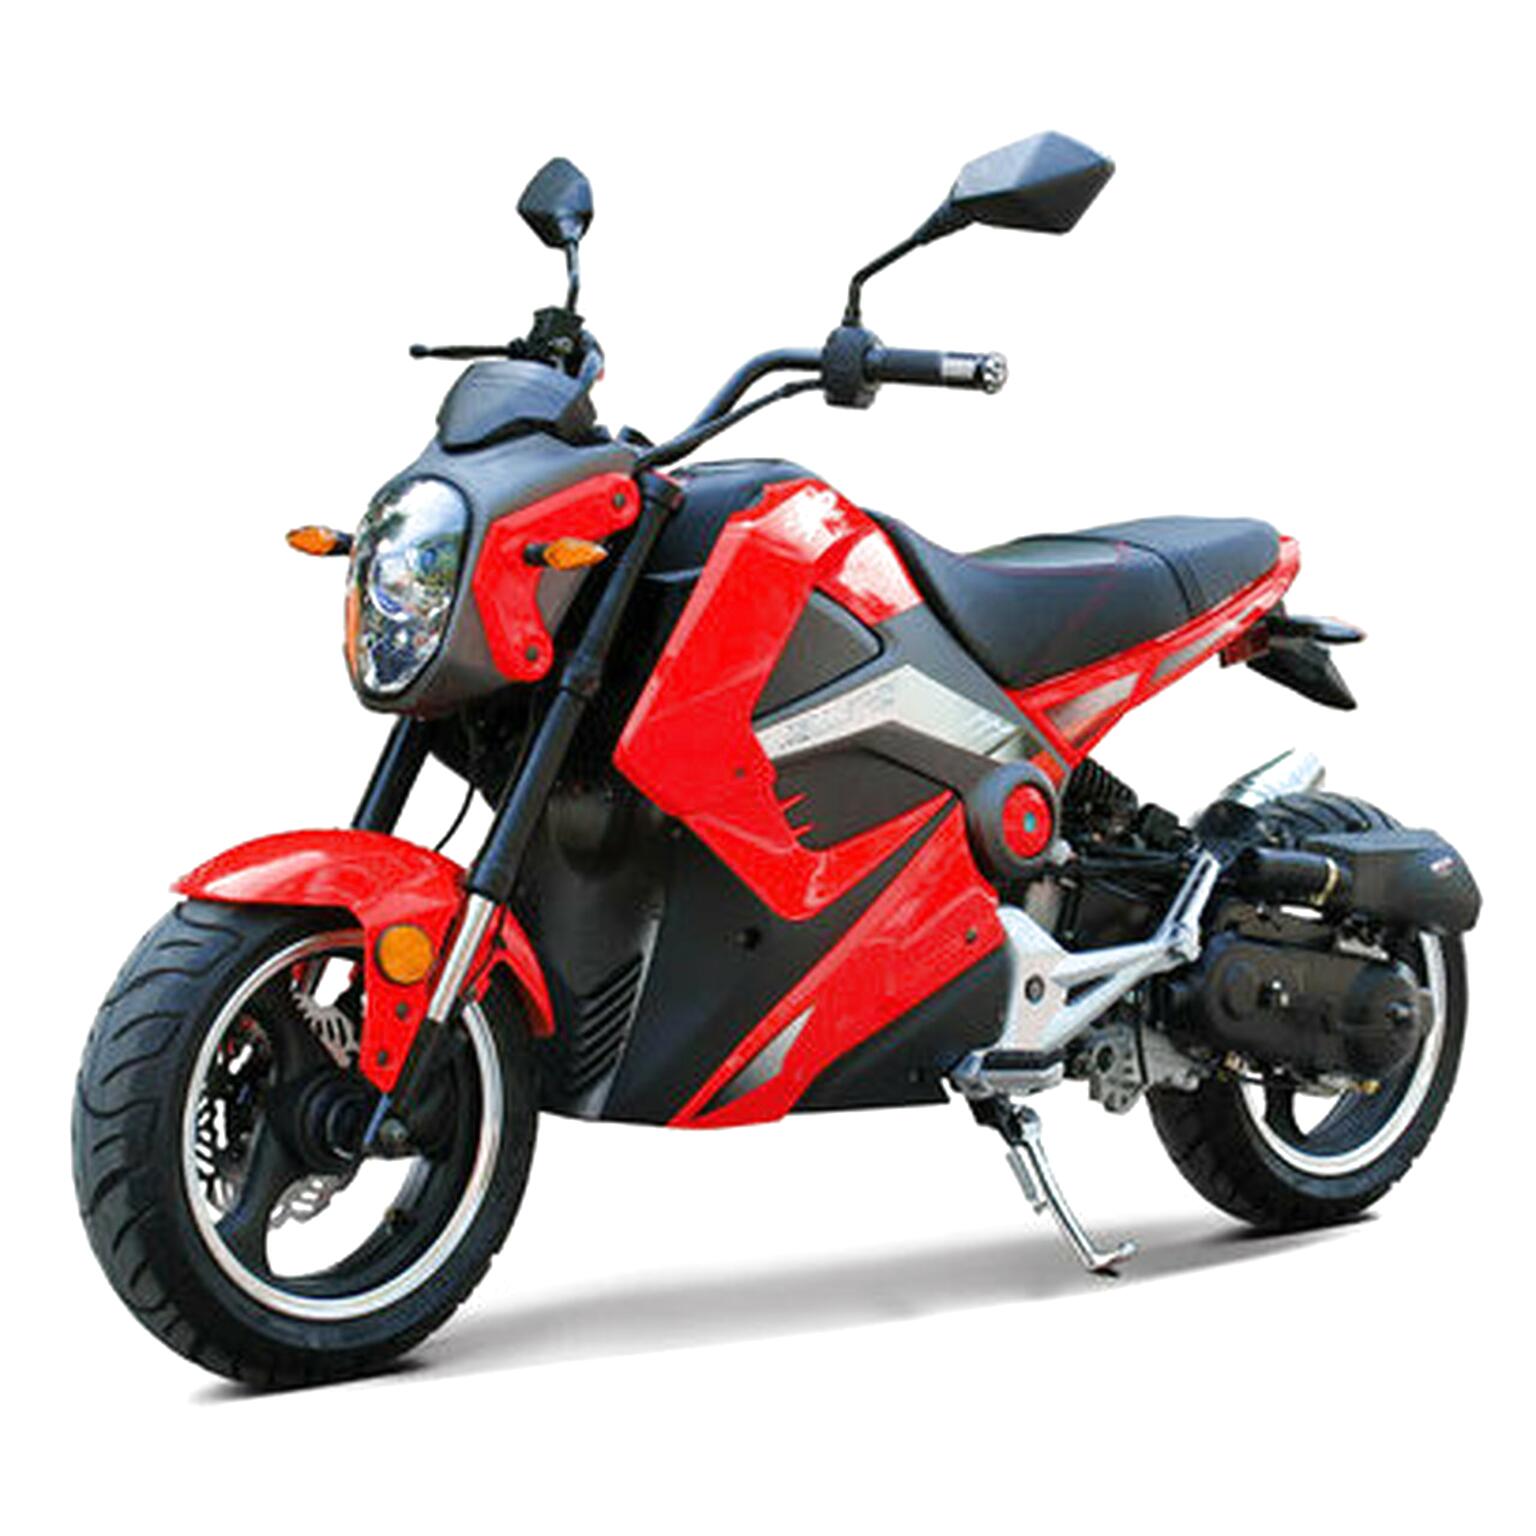 50Cc Motorcycle for sale in UK | 89 used 50Cc Motorcycles